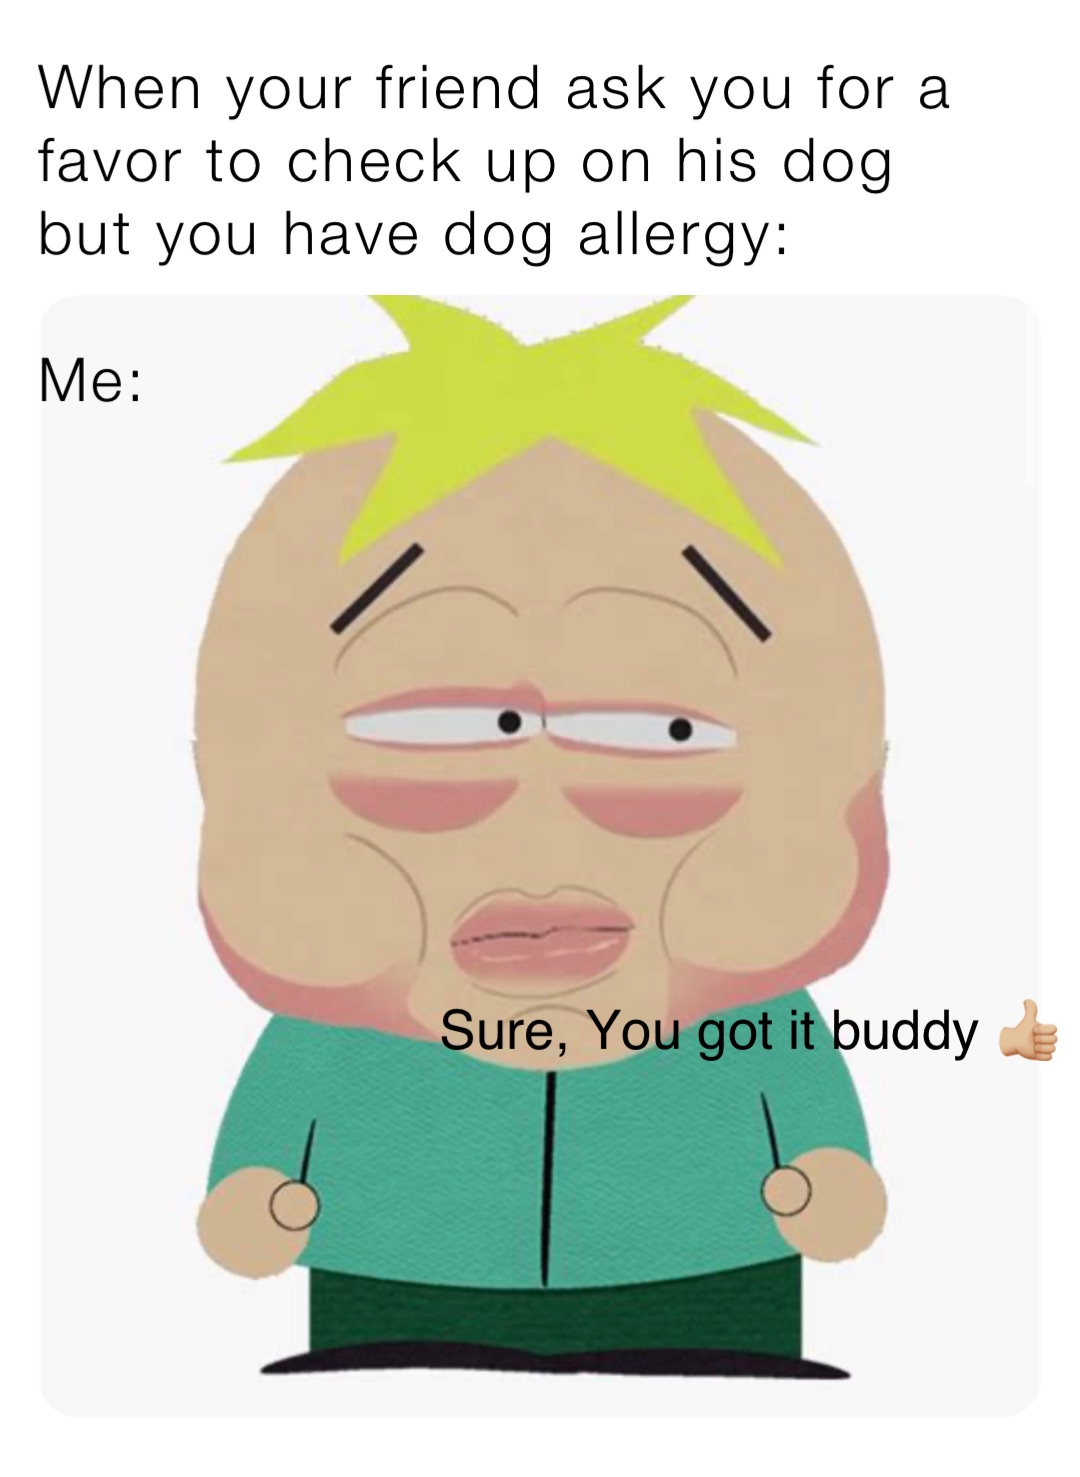 When your friend ask you for a favor to check up on his dog but you have dog allergy: 

Me: Sure, You got it buddy 👍🏼